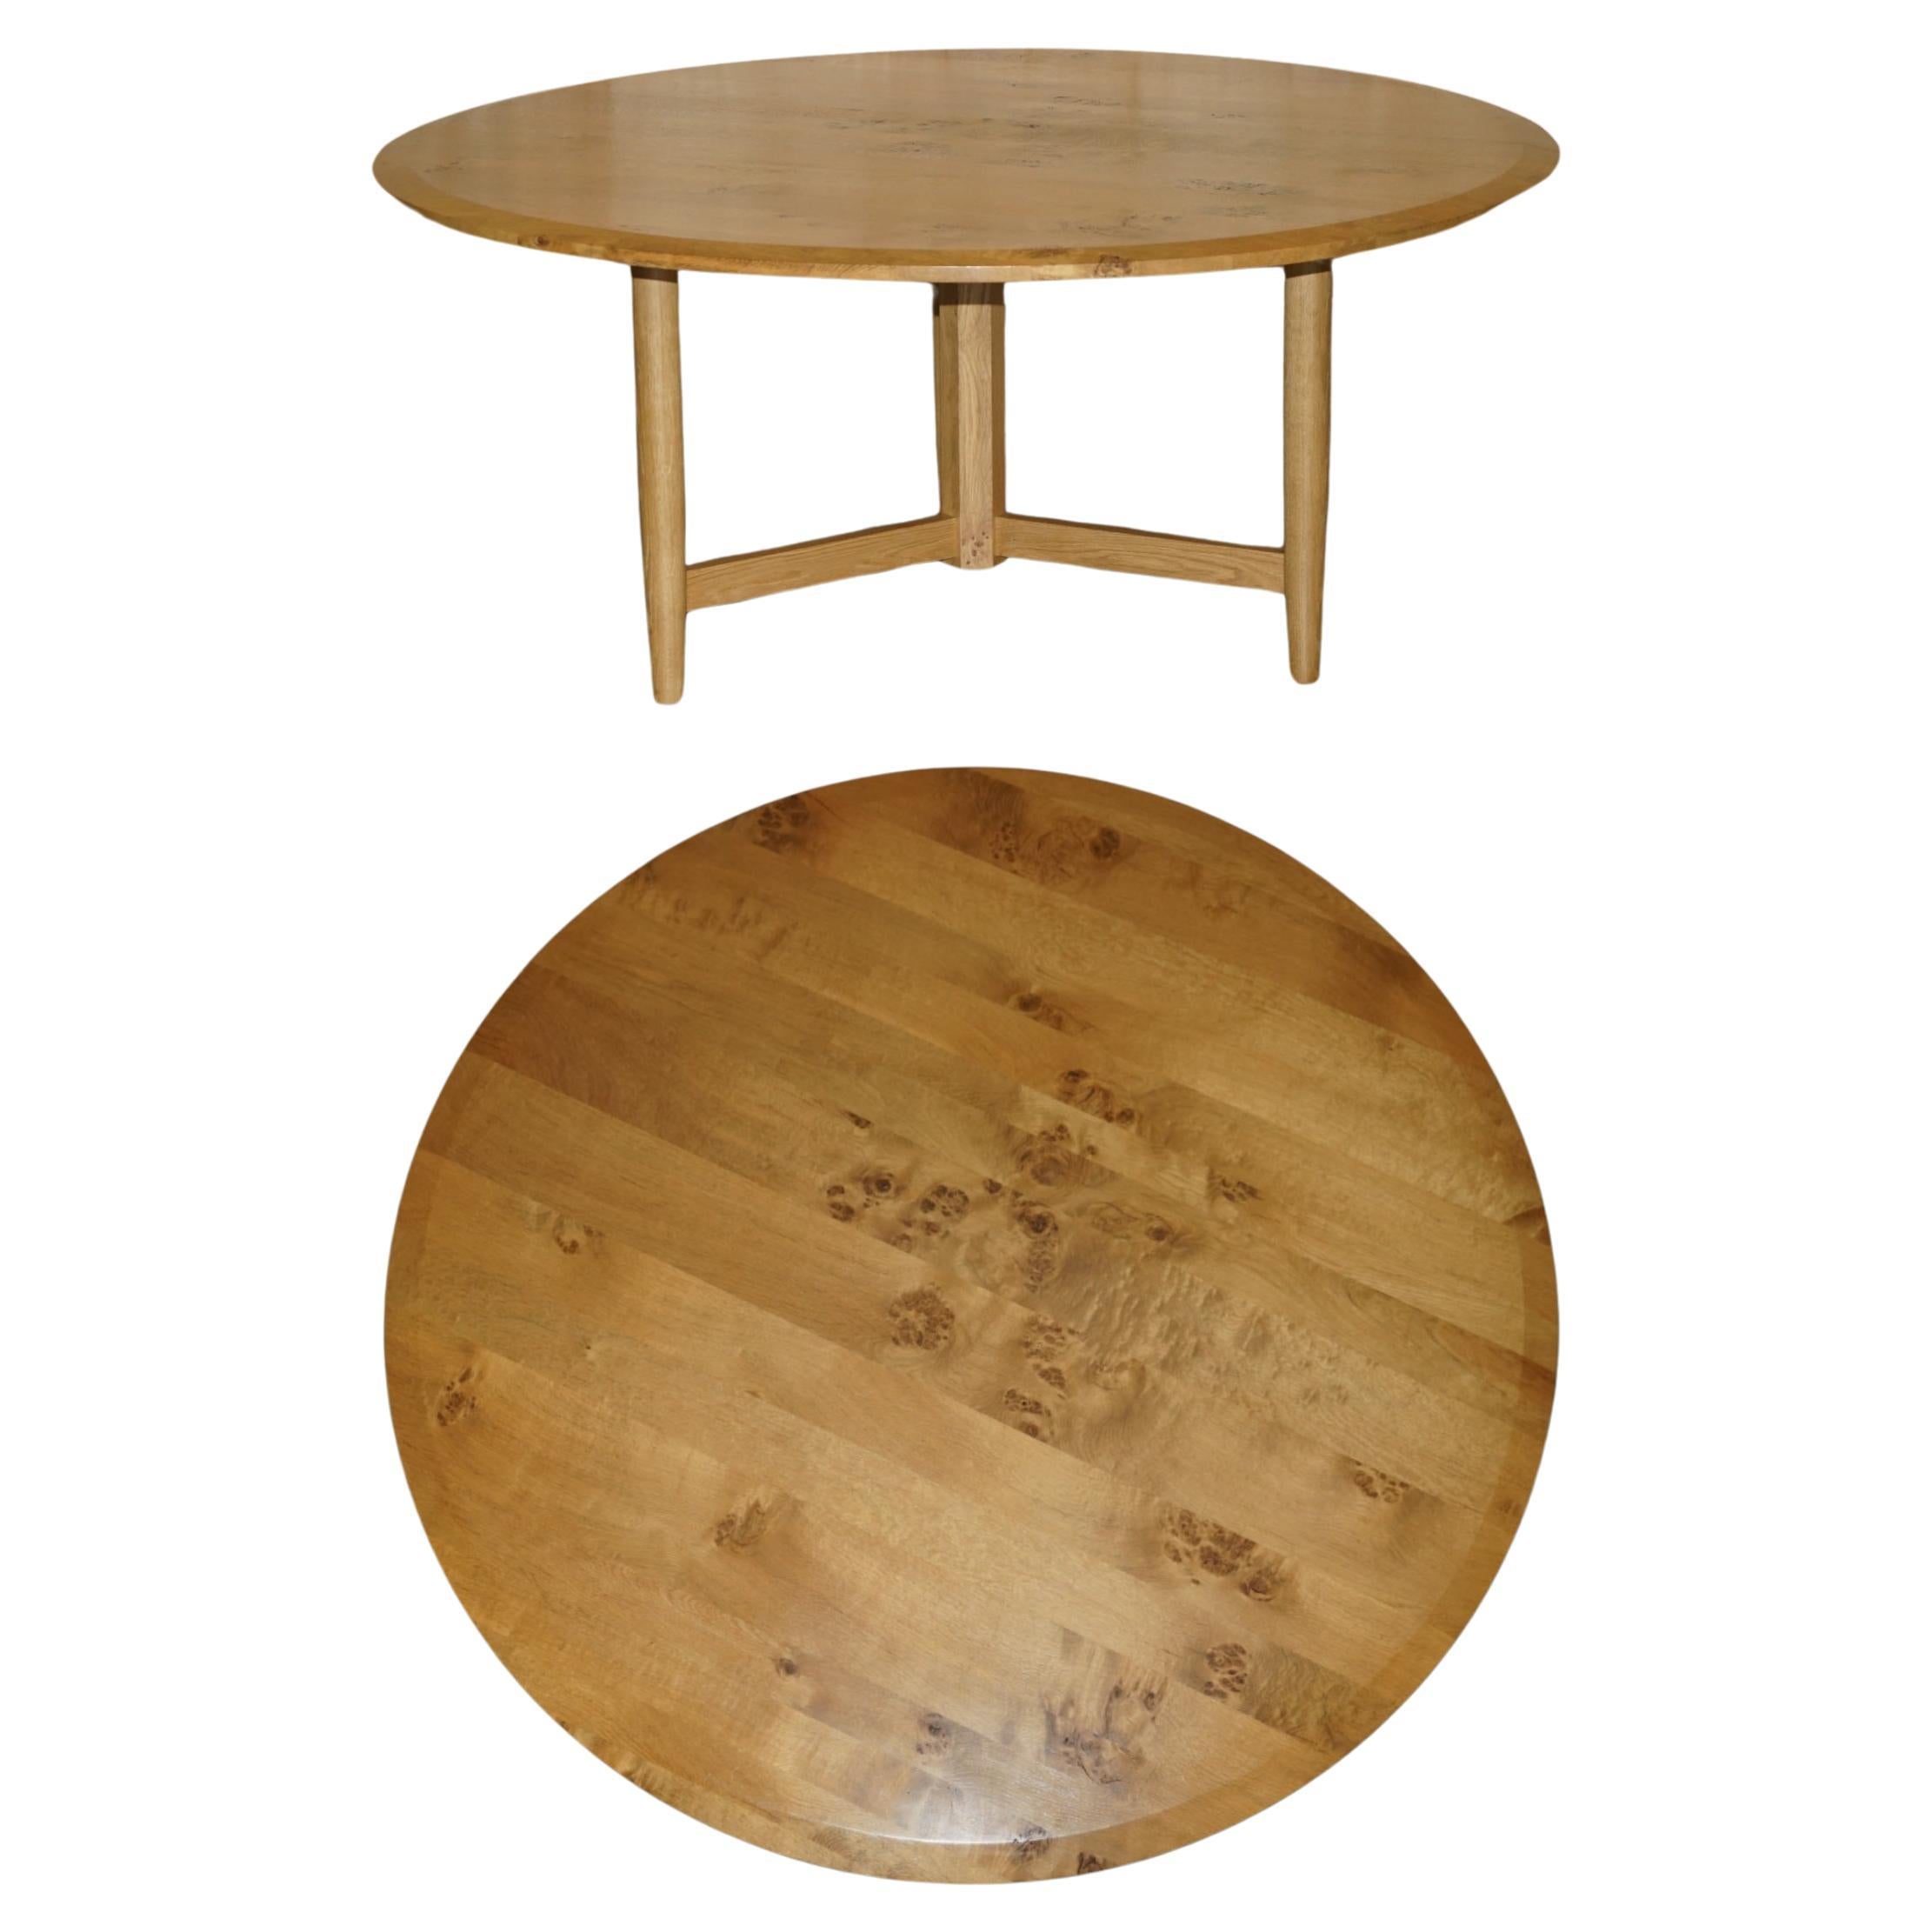 STUNNiNG LARGE 170CM WIDE POLLARD PIPPY BURR OAK ROUND DINING TABLE SEATS EIGHT